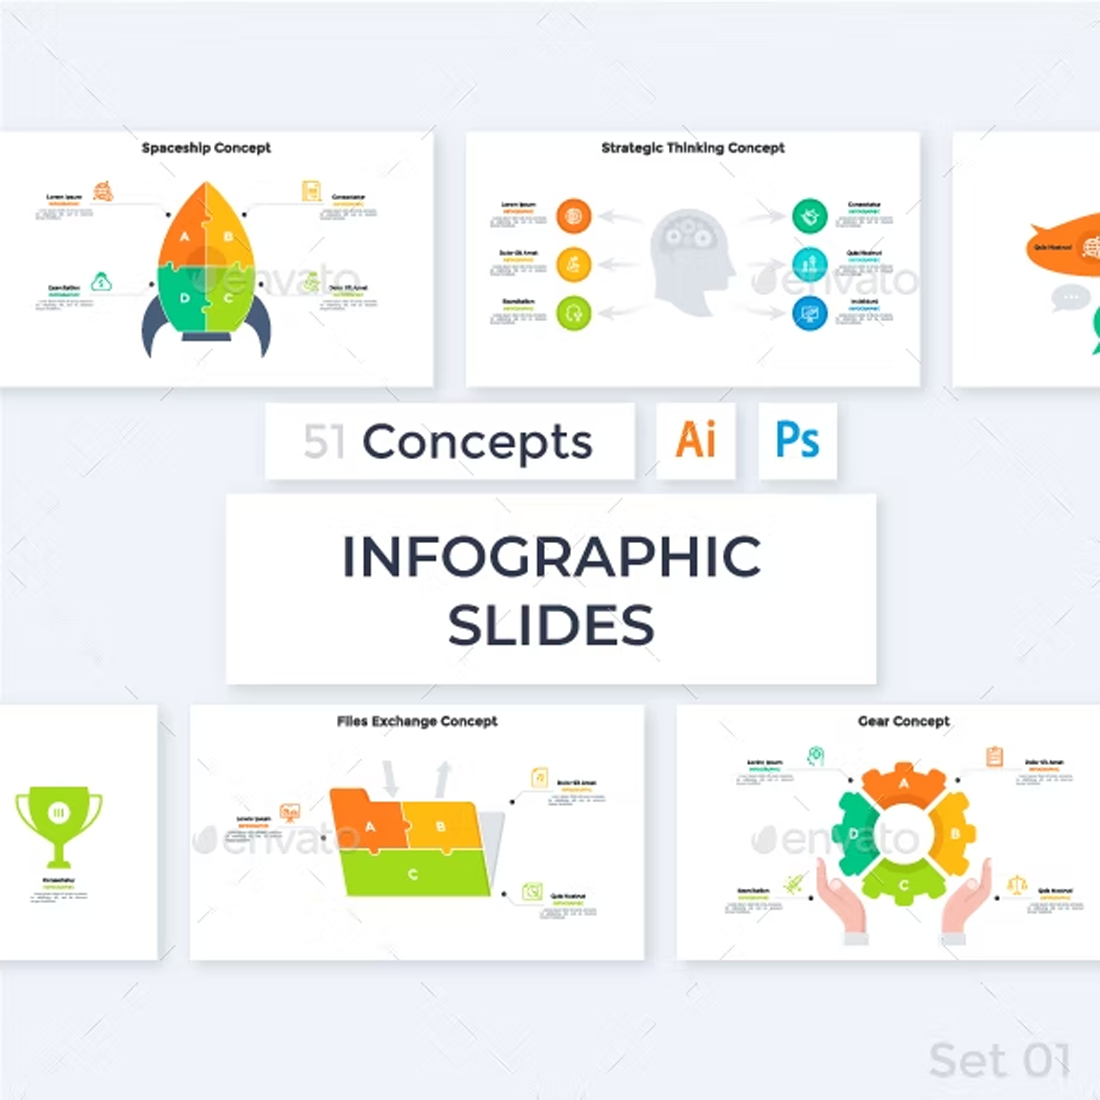 Images preview infographic slides p.1.